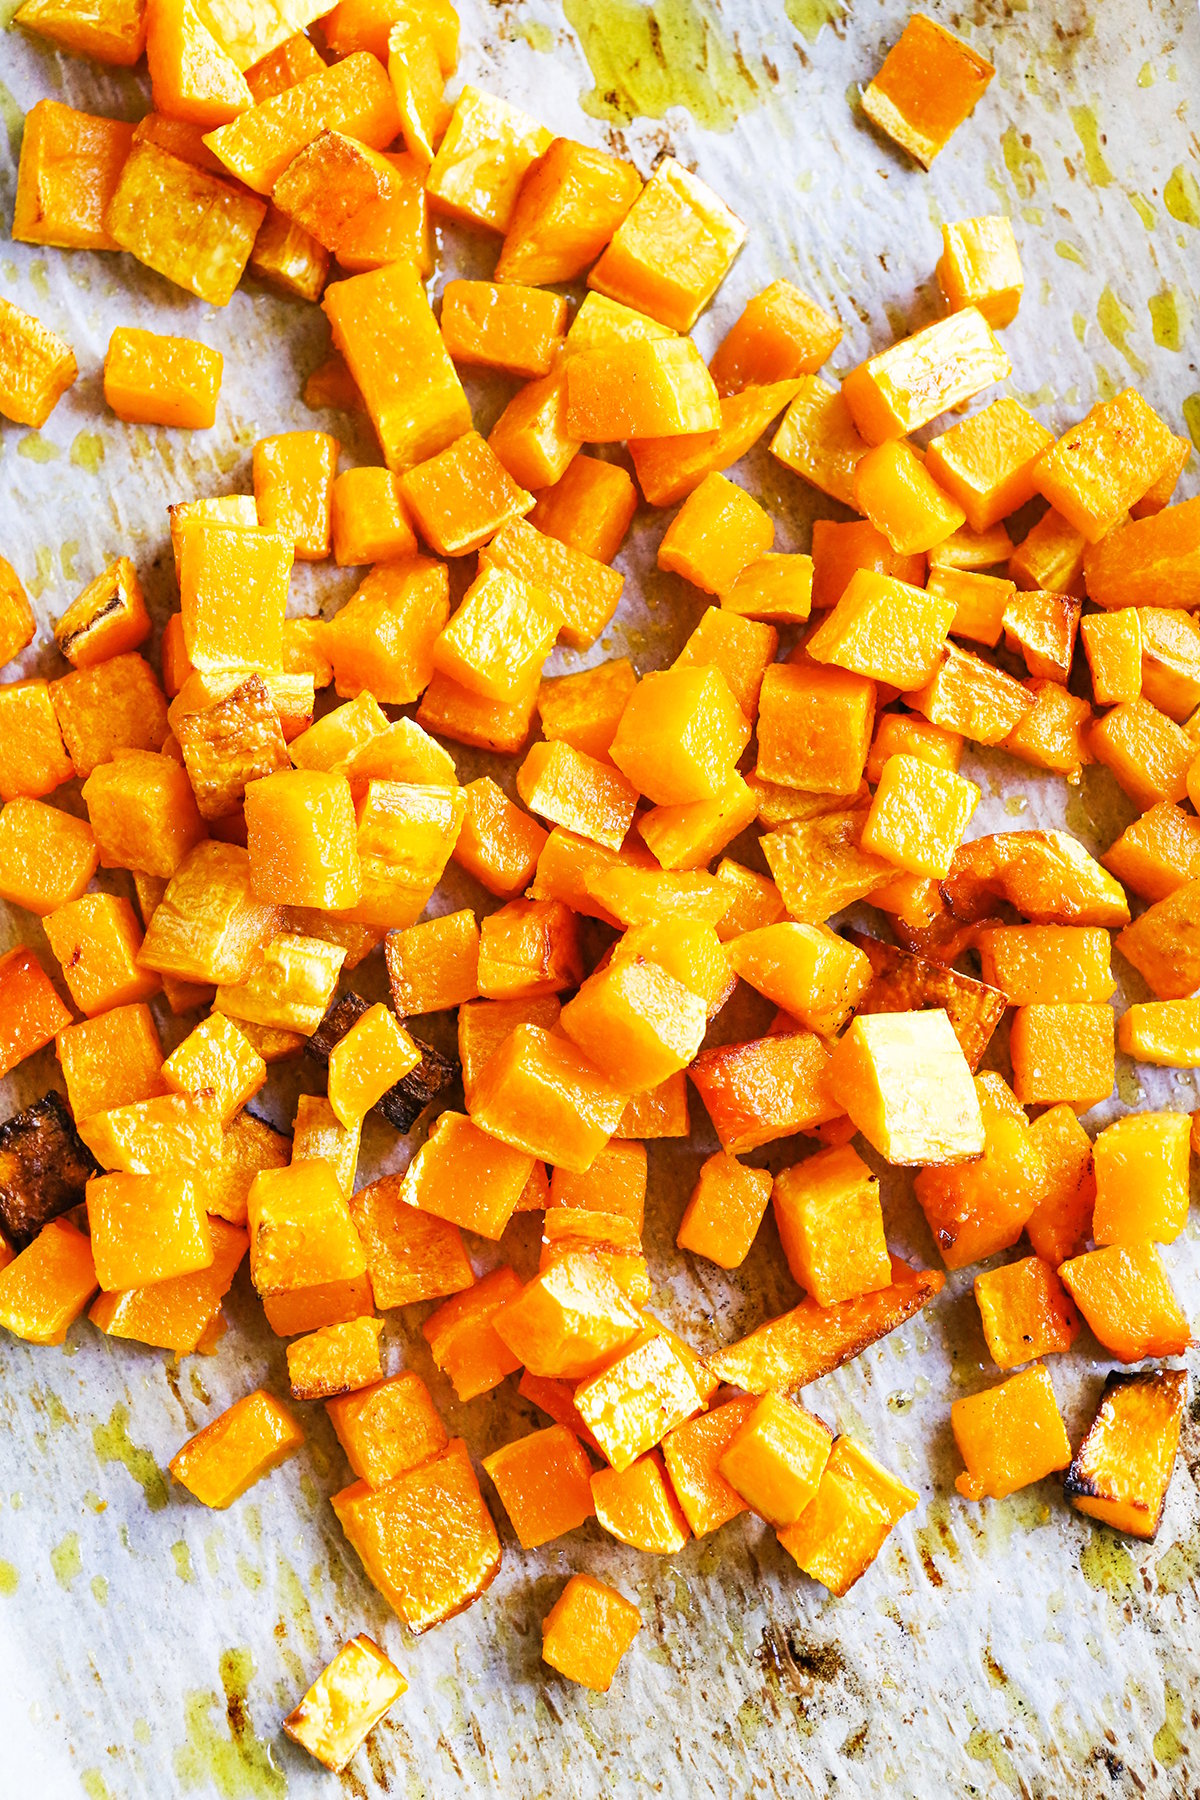 Looking down into a pan of roasted squash.